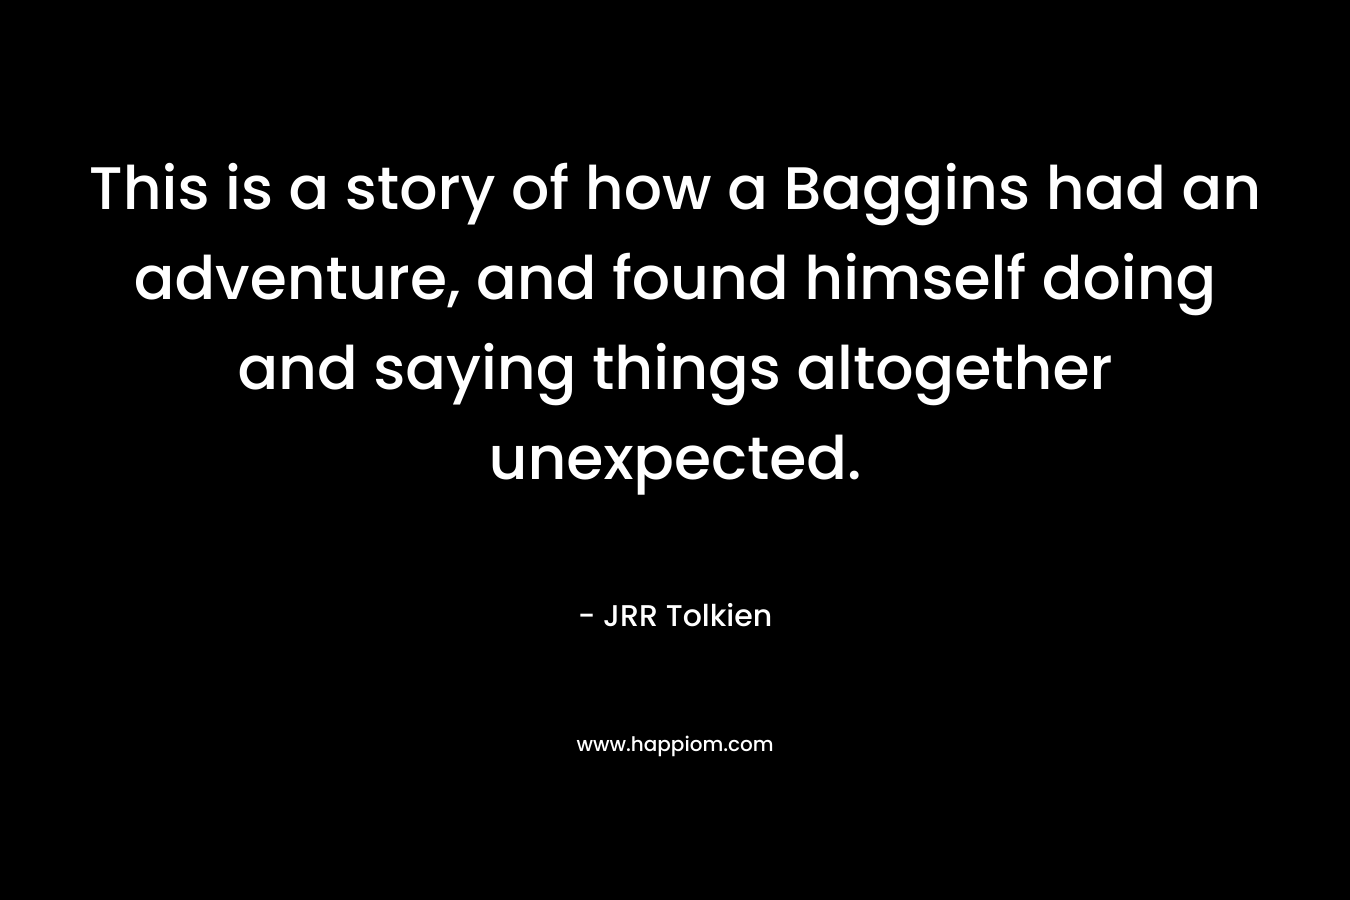 This is a story of how a Baggins had an adventure, and found himself doing and saying things altogether unexpected.